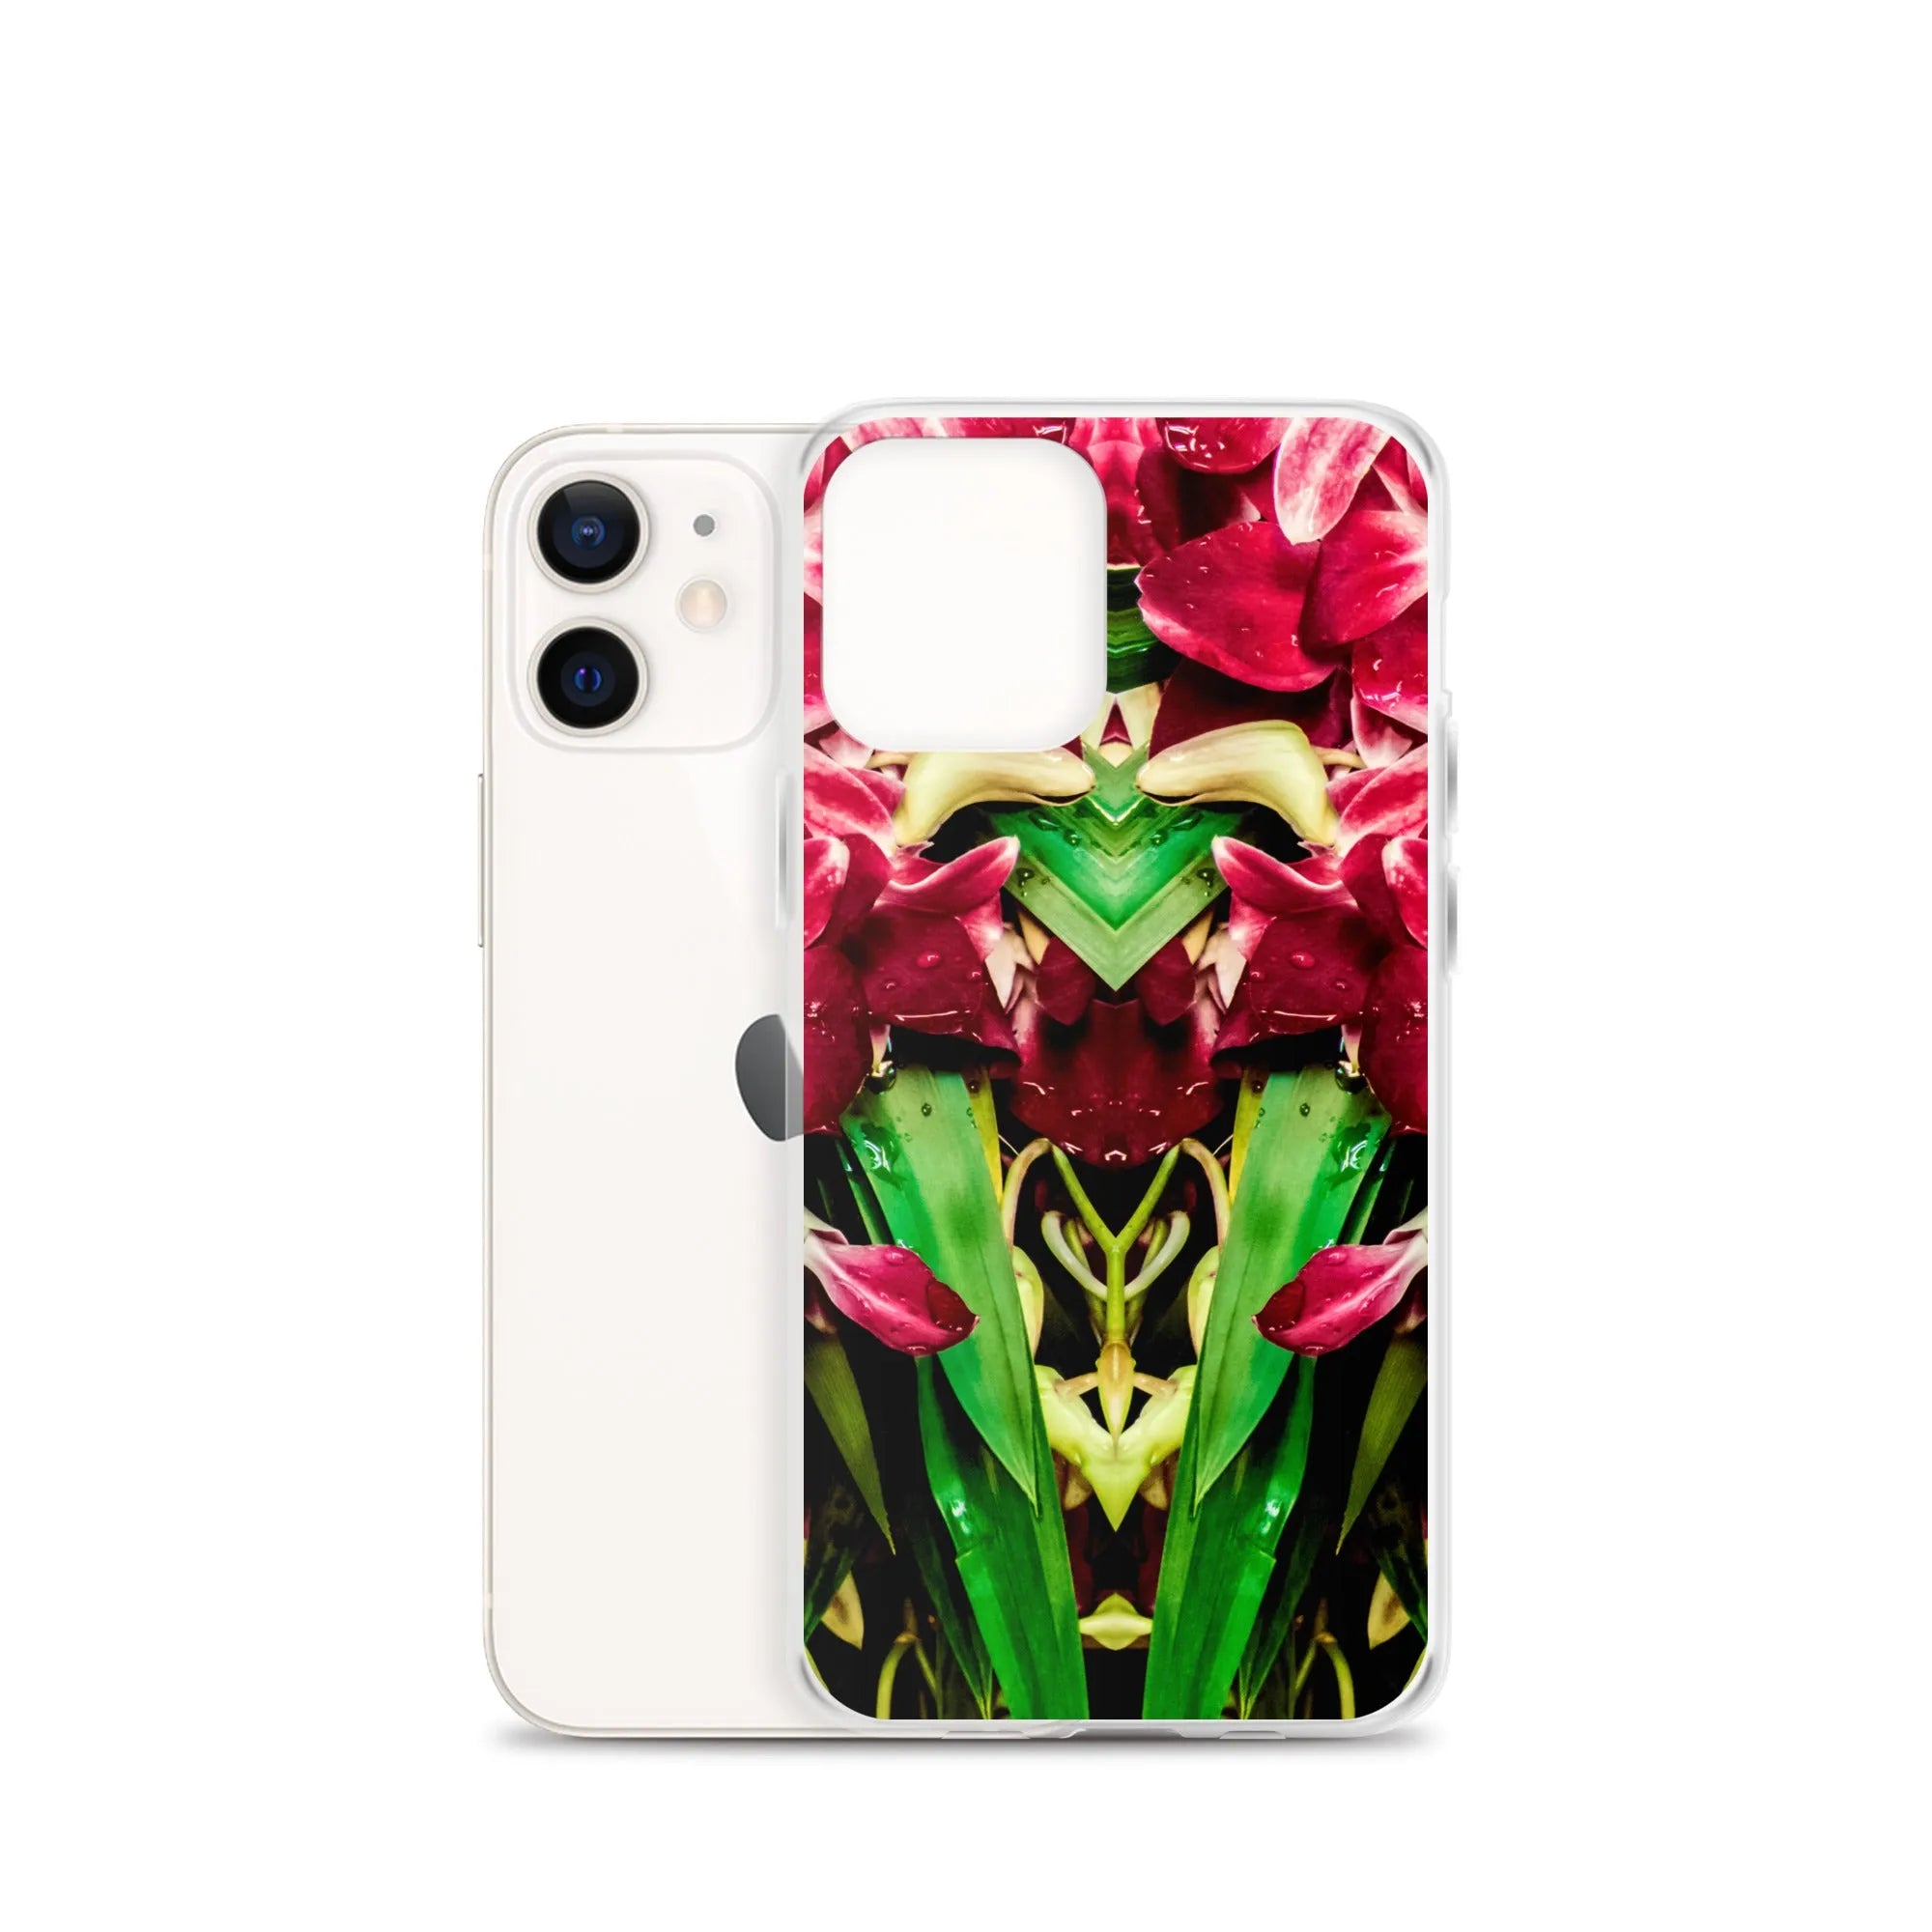 Ruby Reds² Floral Iphone Case - Iphone 12 Mini - Mobile Phone Cases - Aesthetic Art